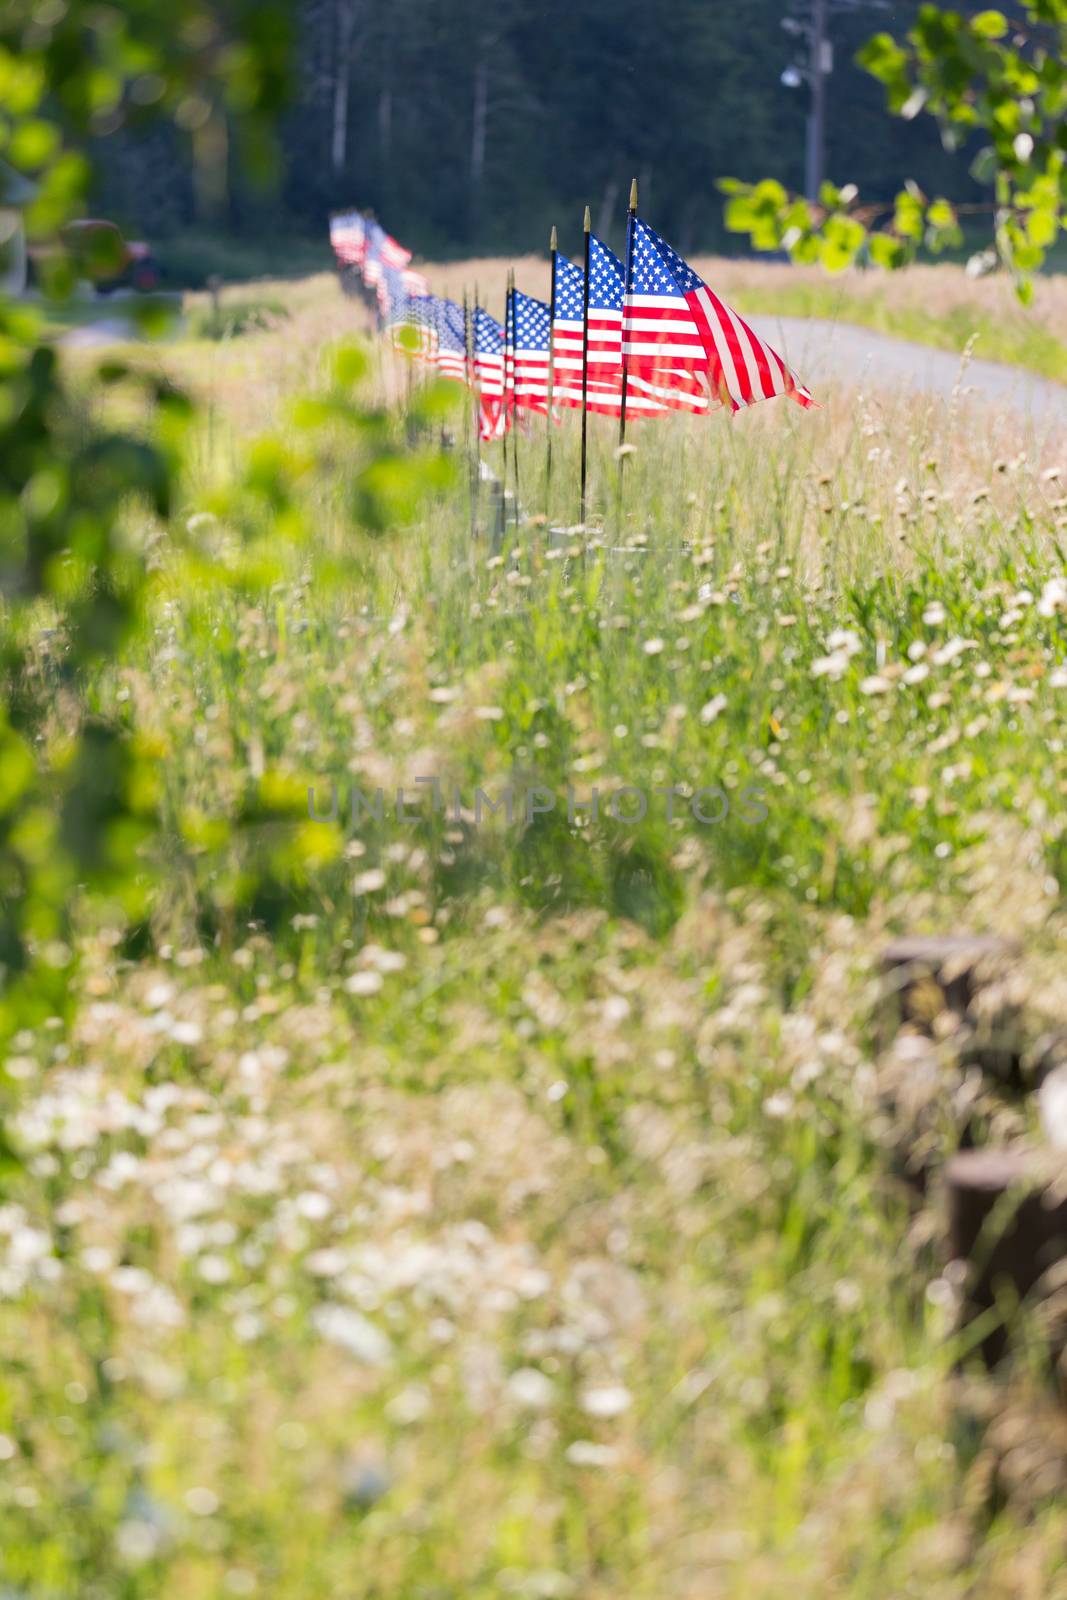 Long Row of American Flags Blowing in Wind on Fence.